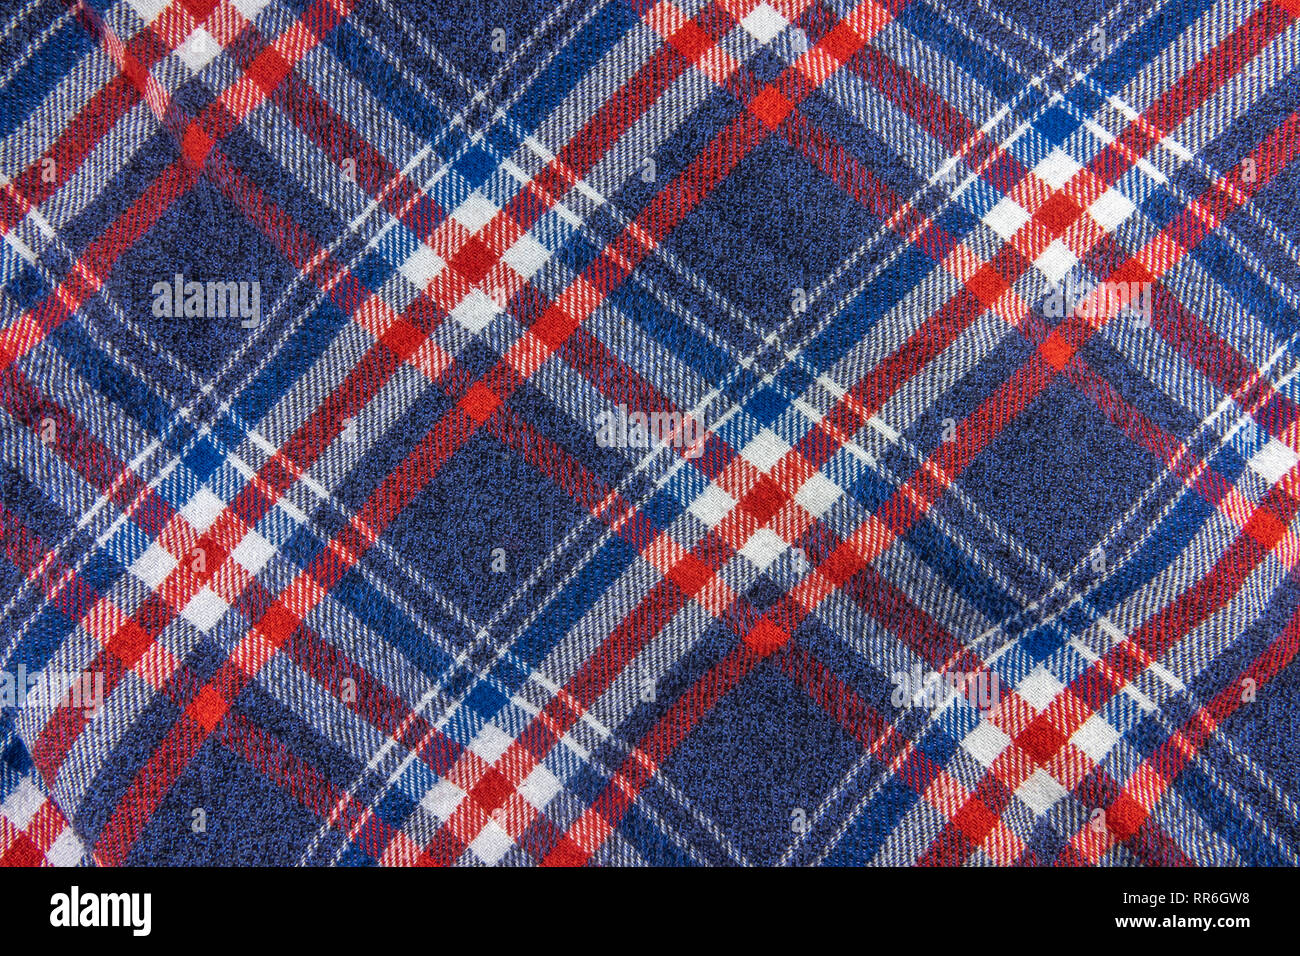 Abstract Background Texture Of A Blue, White And Red Plaid Hipster Shirt Pattern Stock Photo